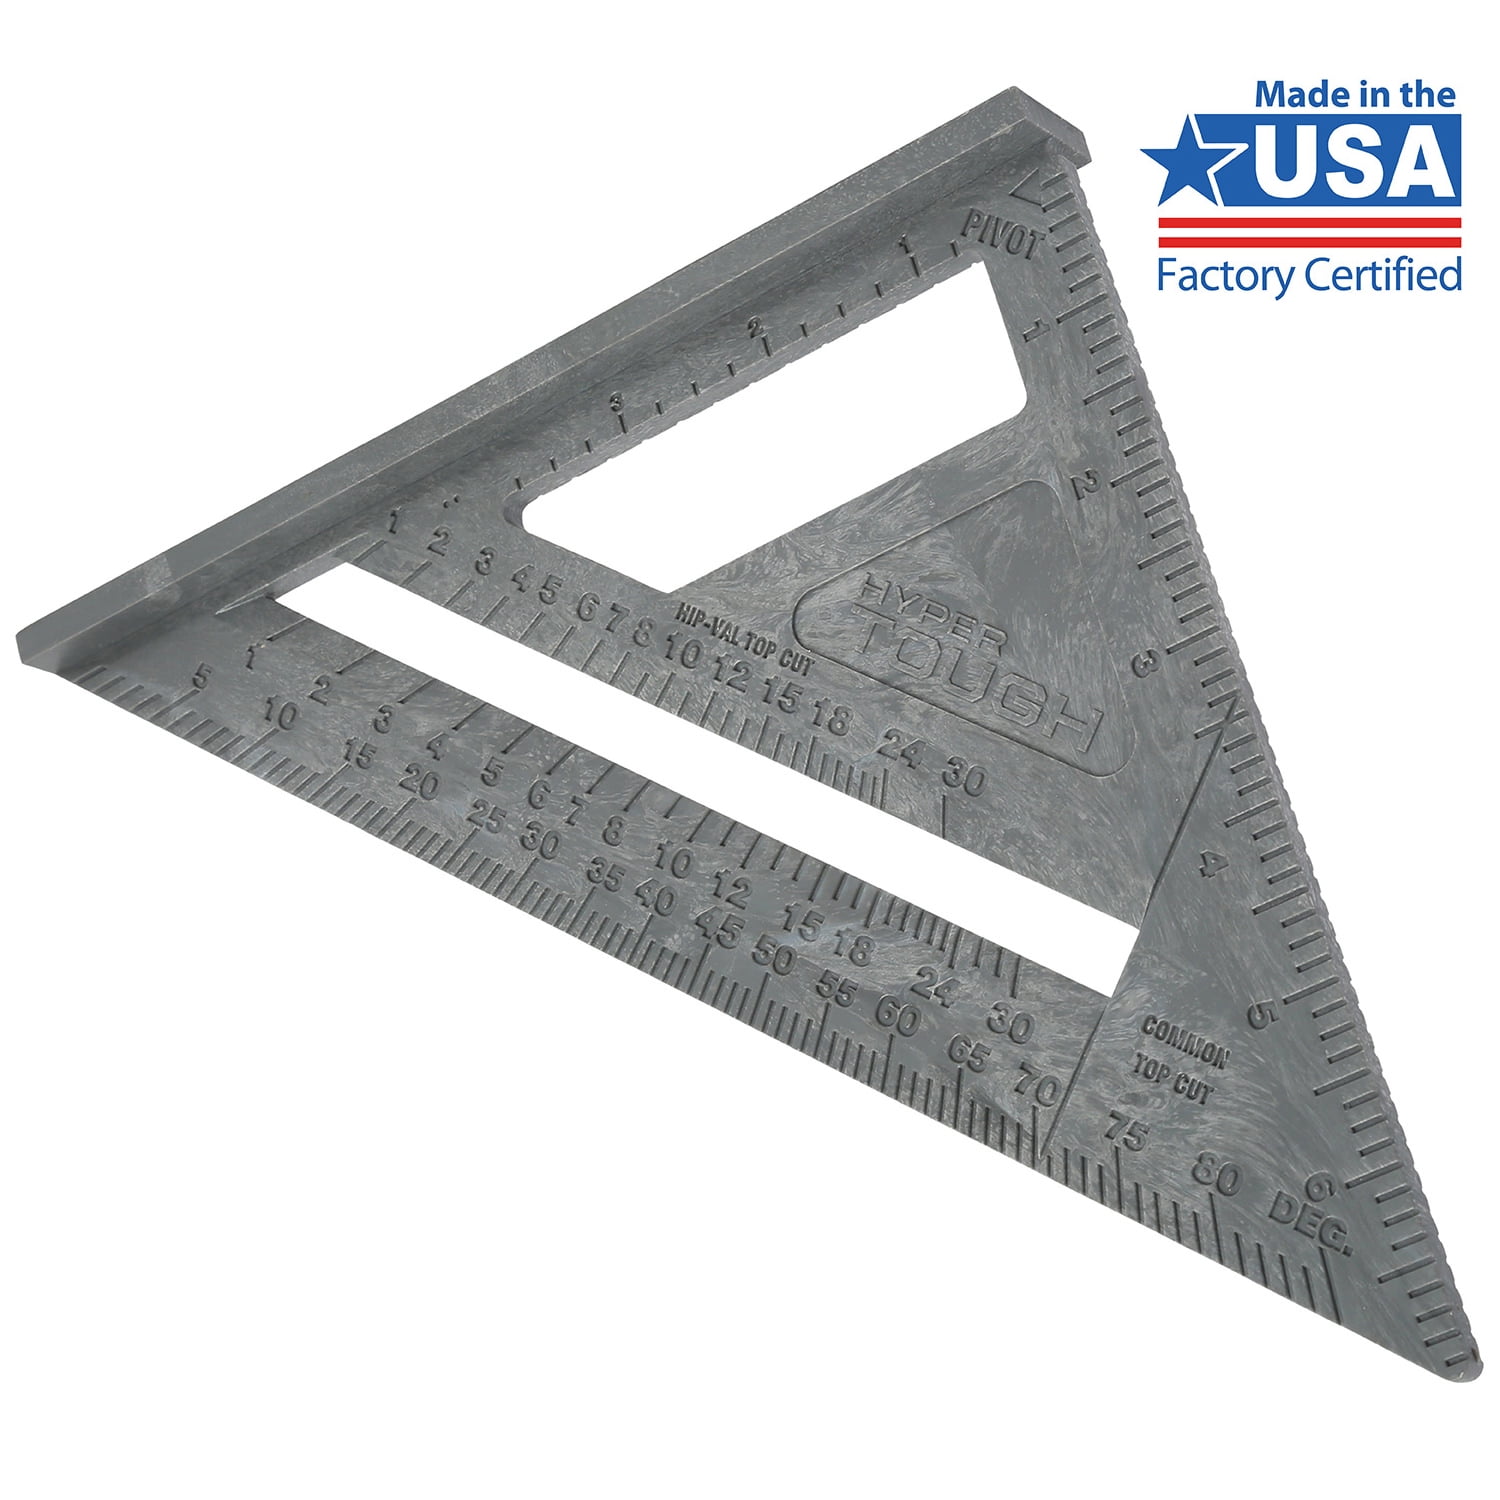 Hyper Tough 7-Inch Framing Rafter Square, Durable Plastic Triangle Quick Square Tool